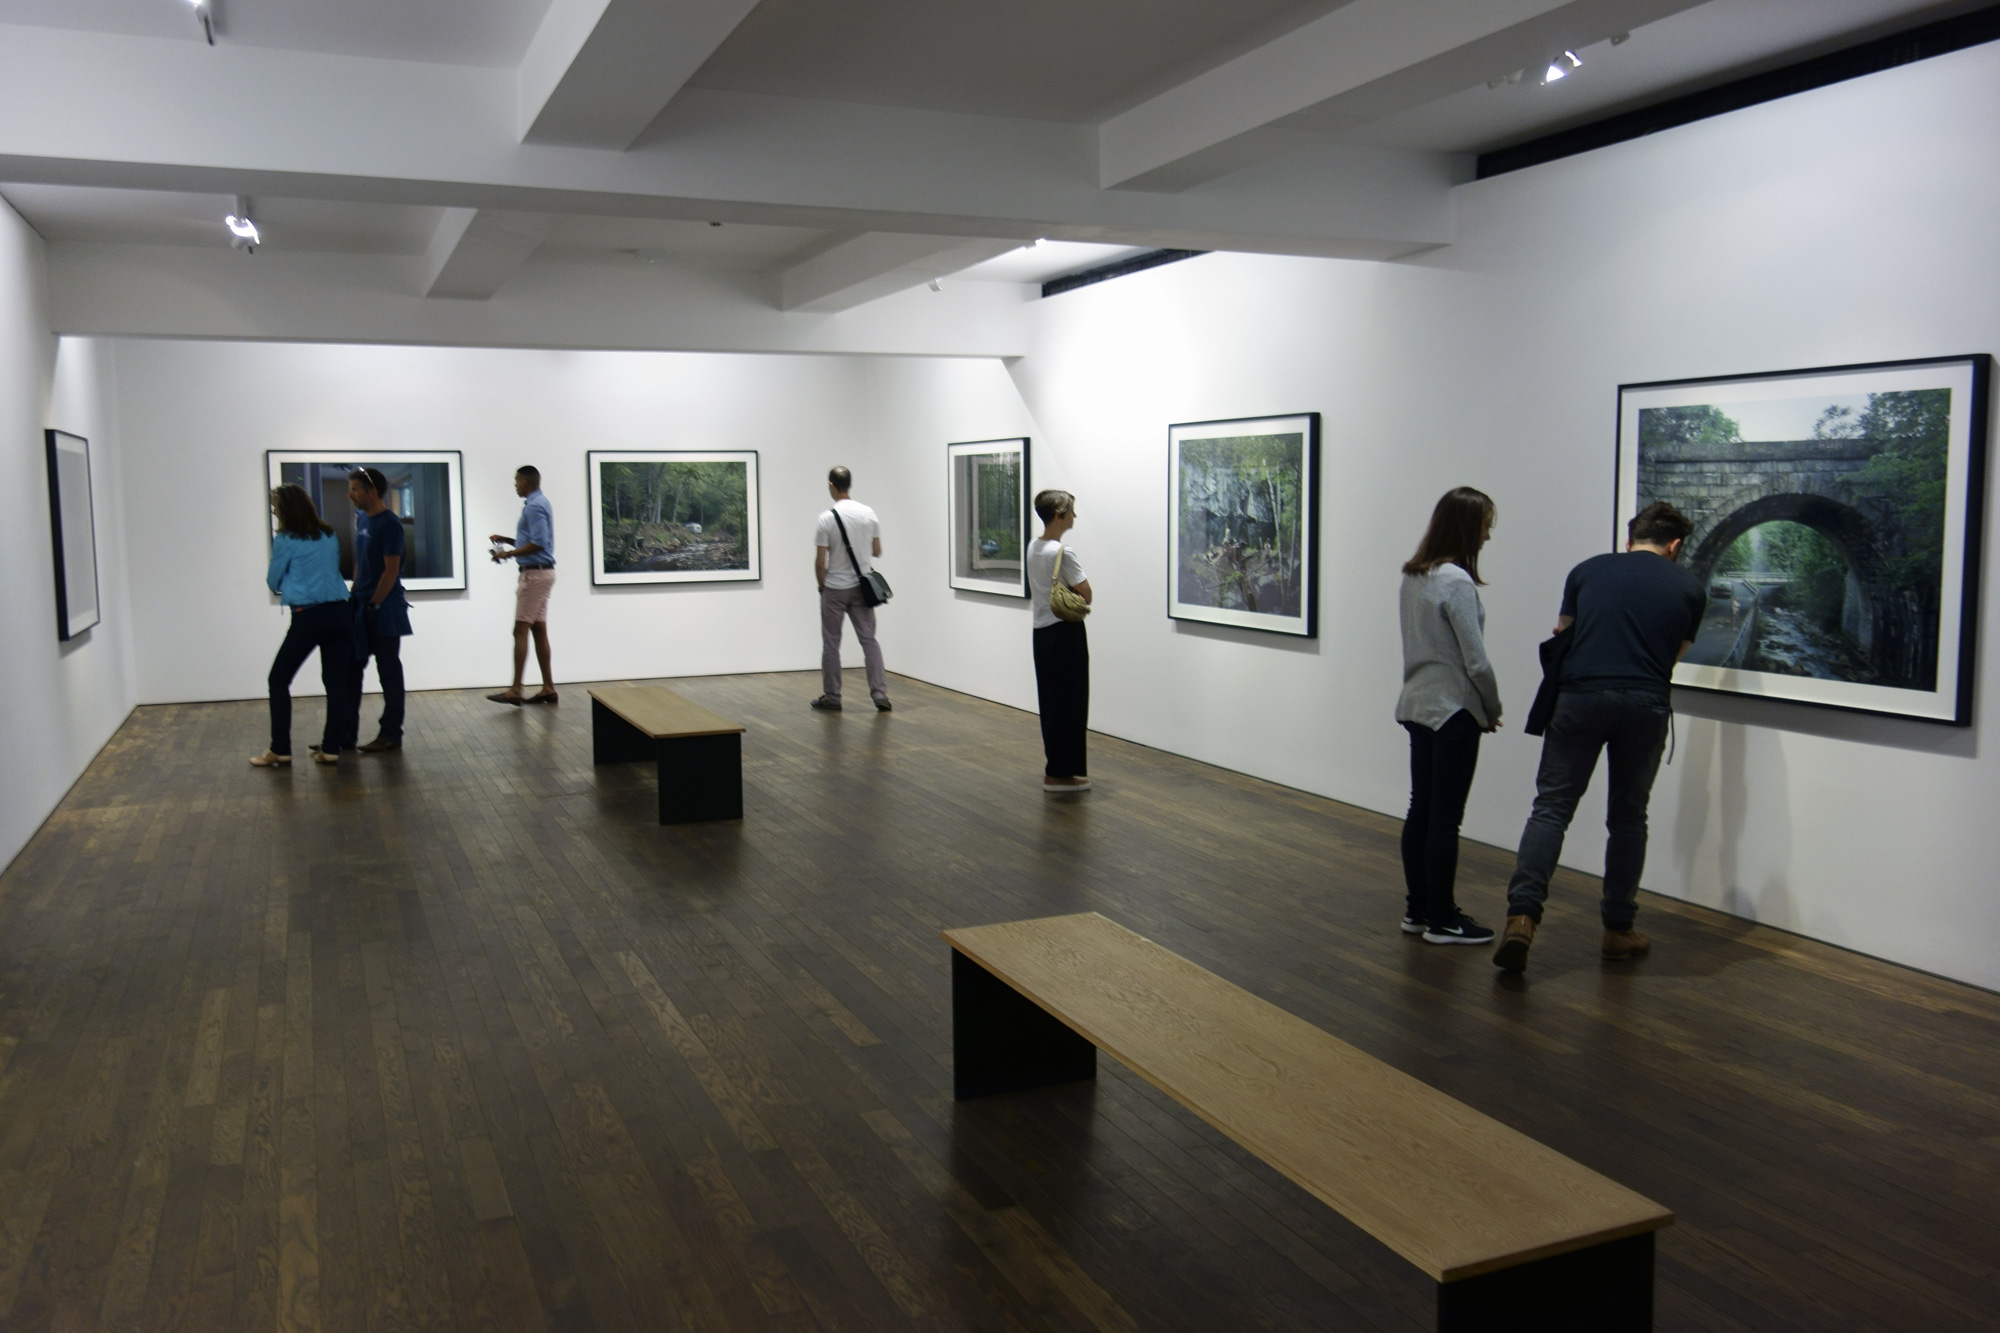 Installation view of Room 3 of 'Gregory Crewdson: Cathedral of the Pines' at The Photographers' Gallery